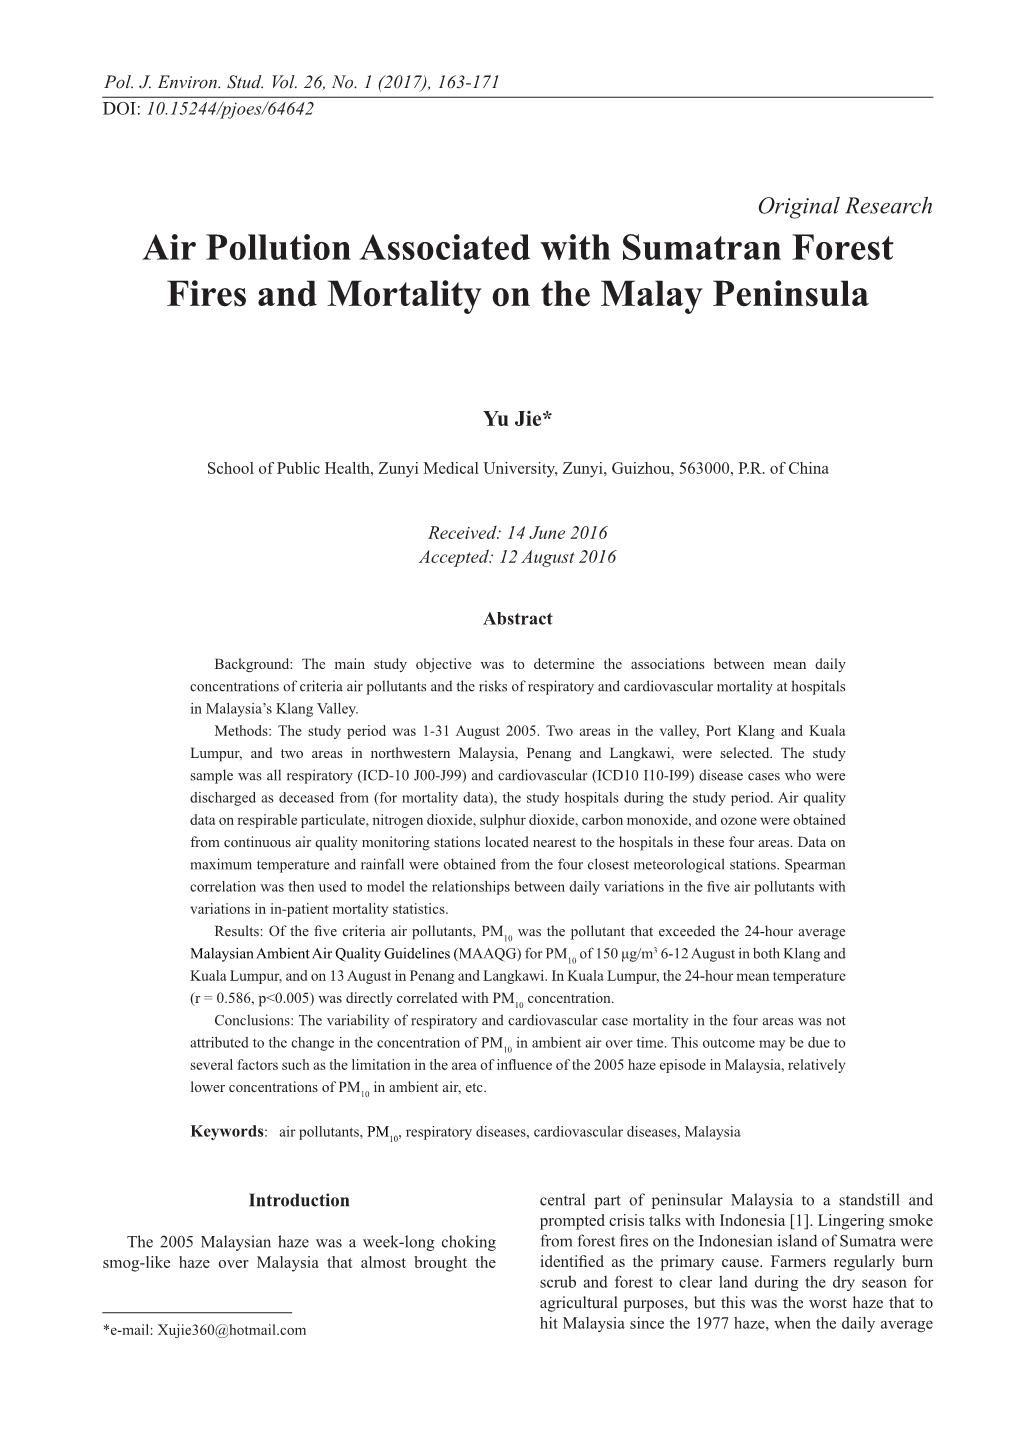 Air Pollution Associated with Sumatran Forest Fires and Mortality on the Malay Peninsula